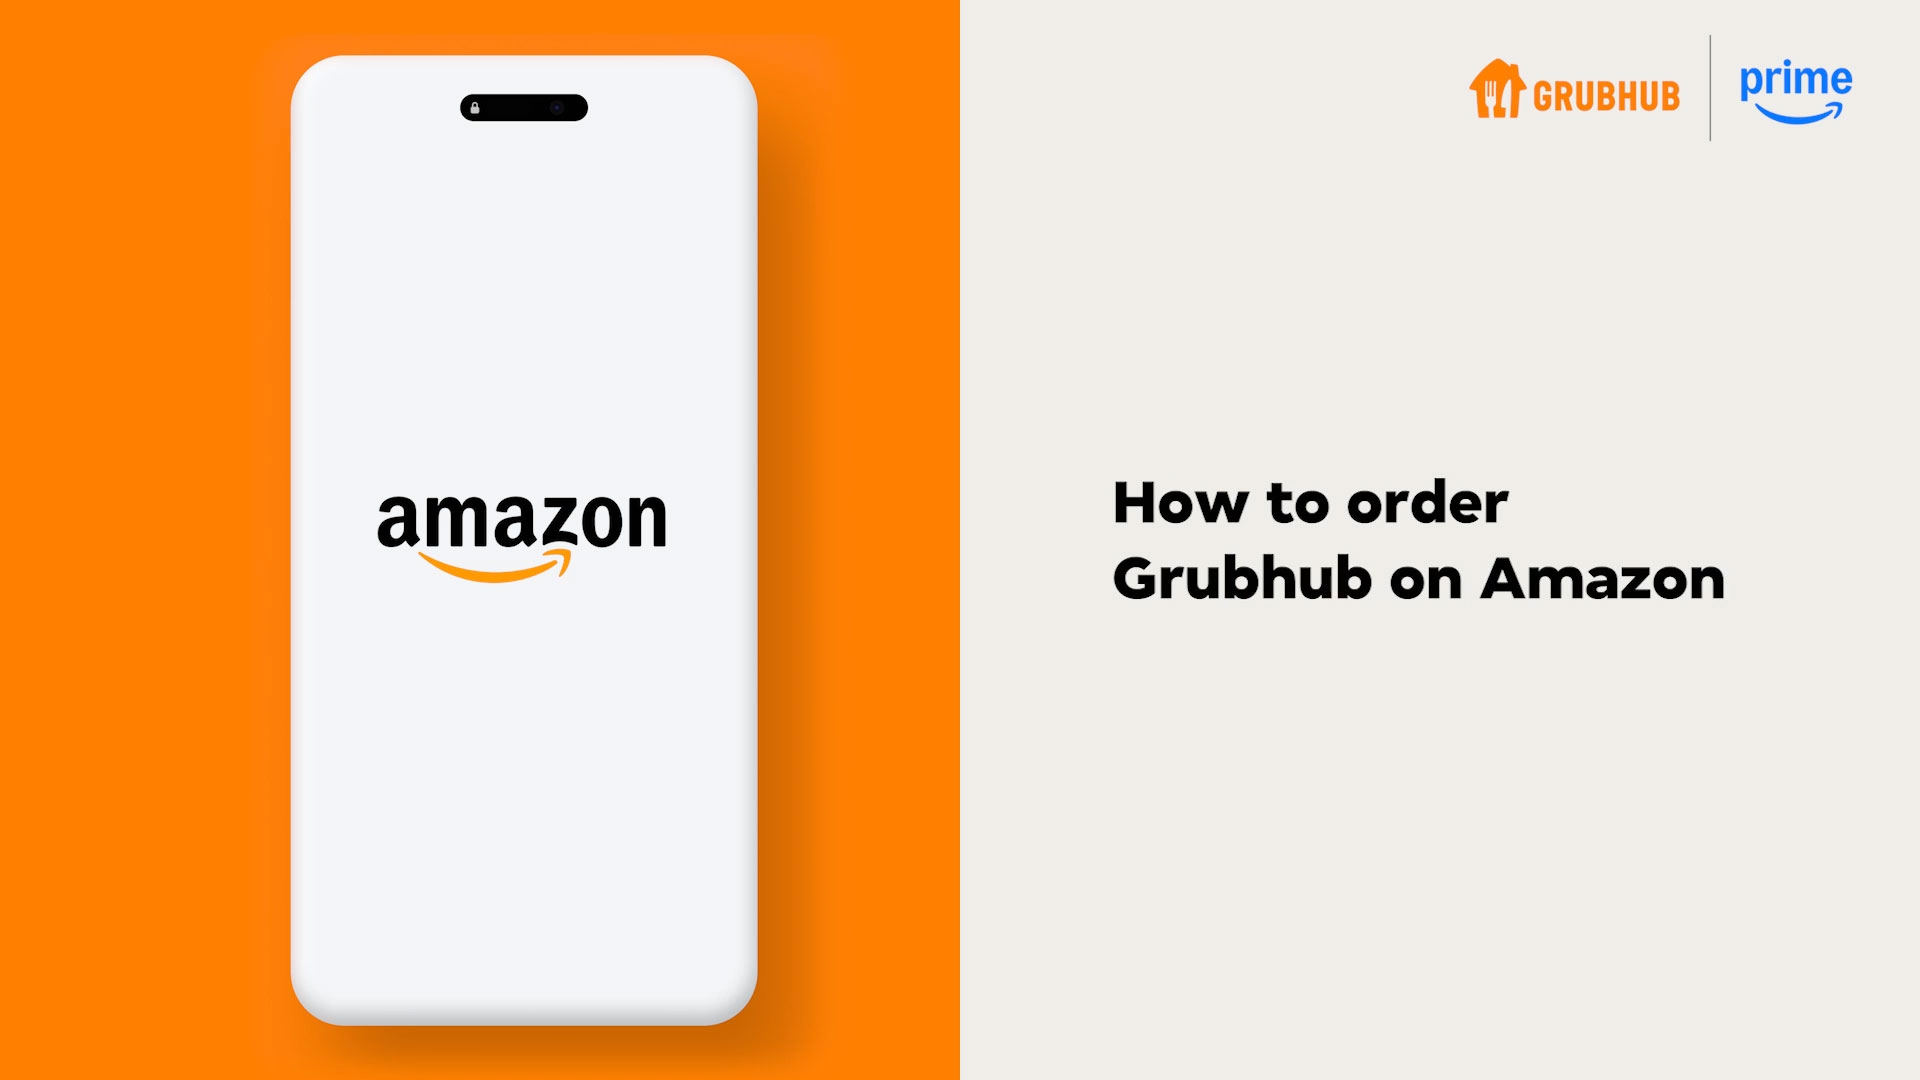 Prime members get free Grubhub+, and Amazon customers can order Grubhub on Amazon.com and in the Amazon Shopping app.